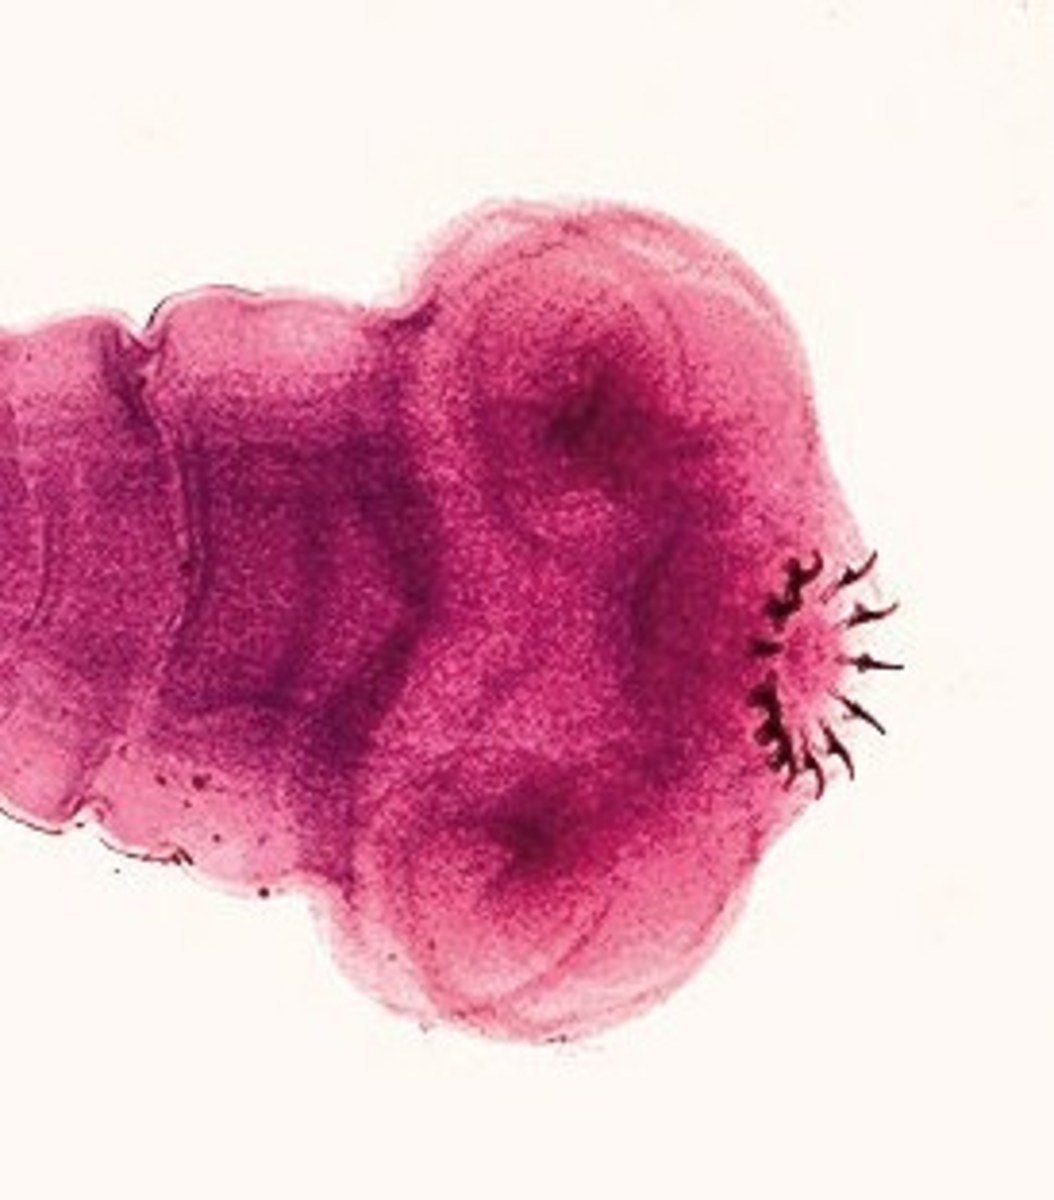 The tape worm attaches to the intestine with a scolex (picture here) it then absorbed nutrients directly through its skin. 